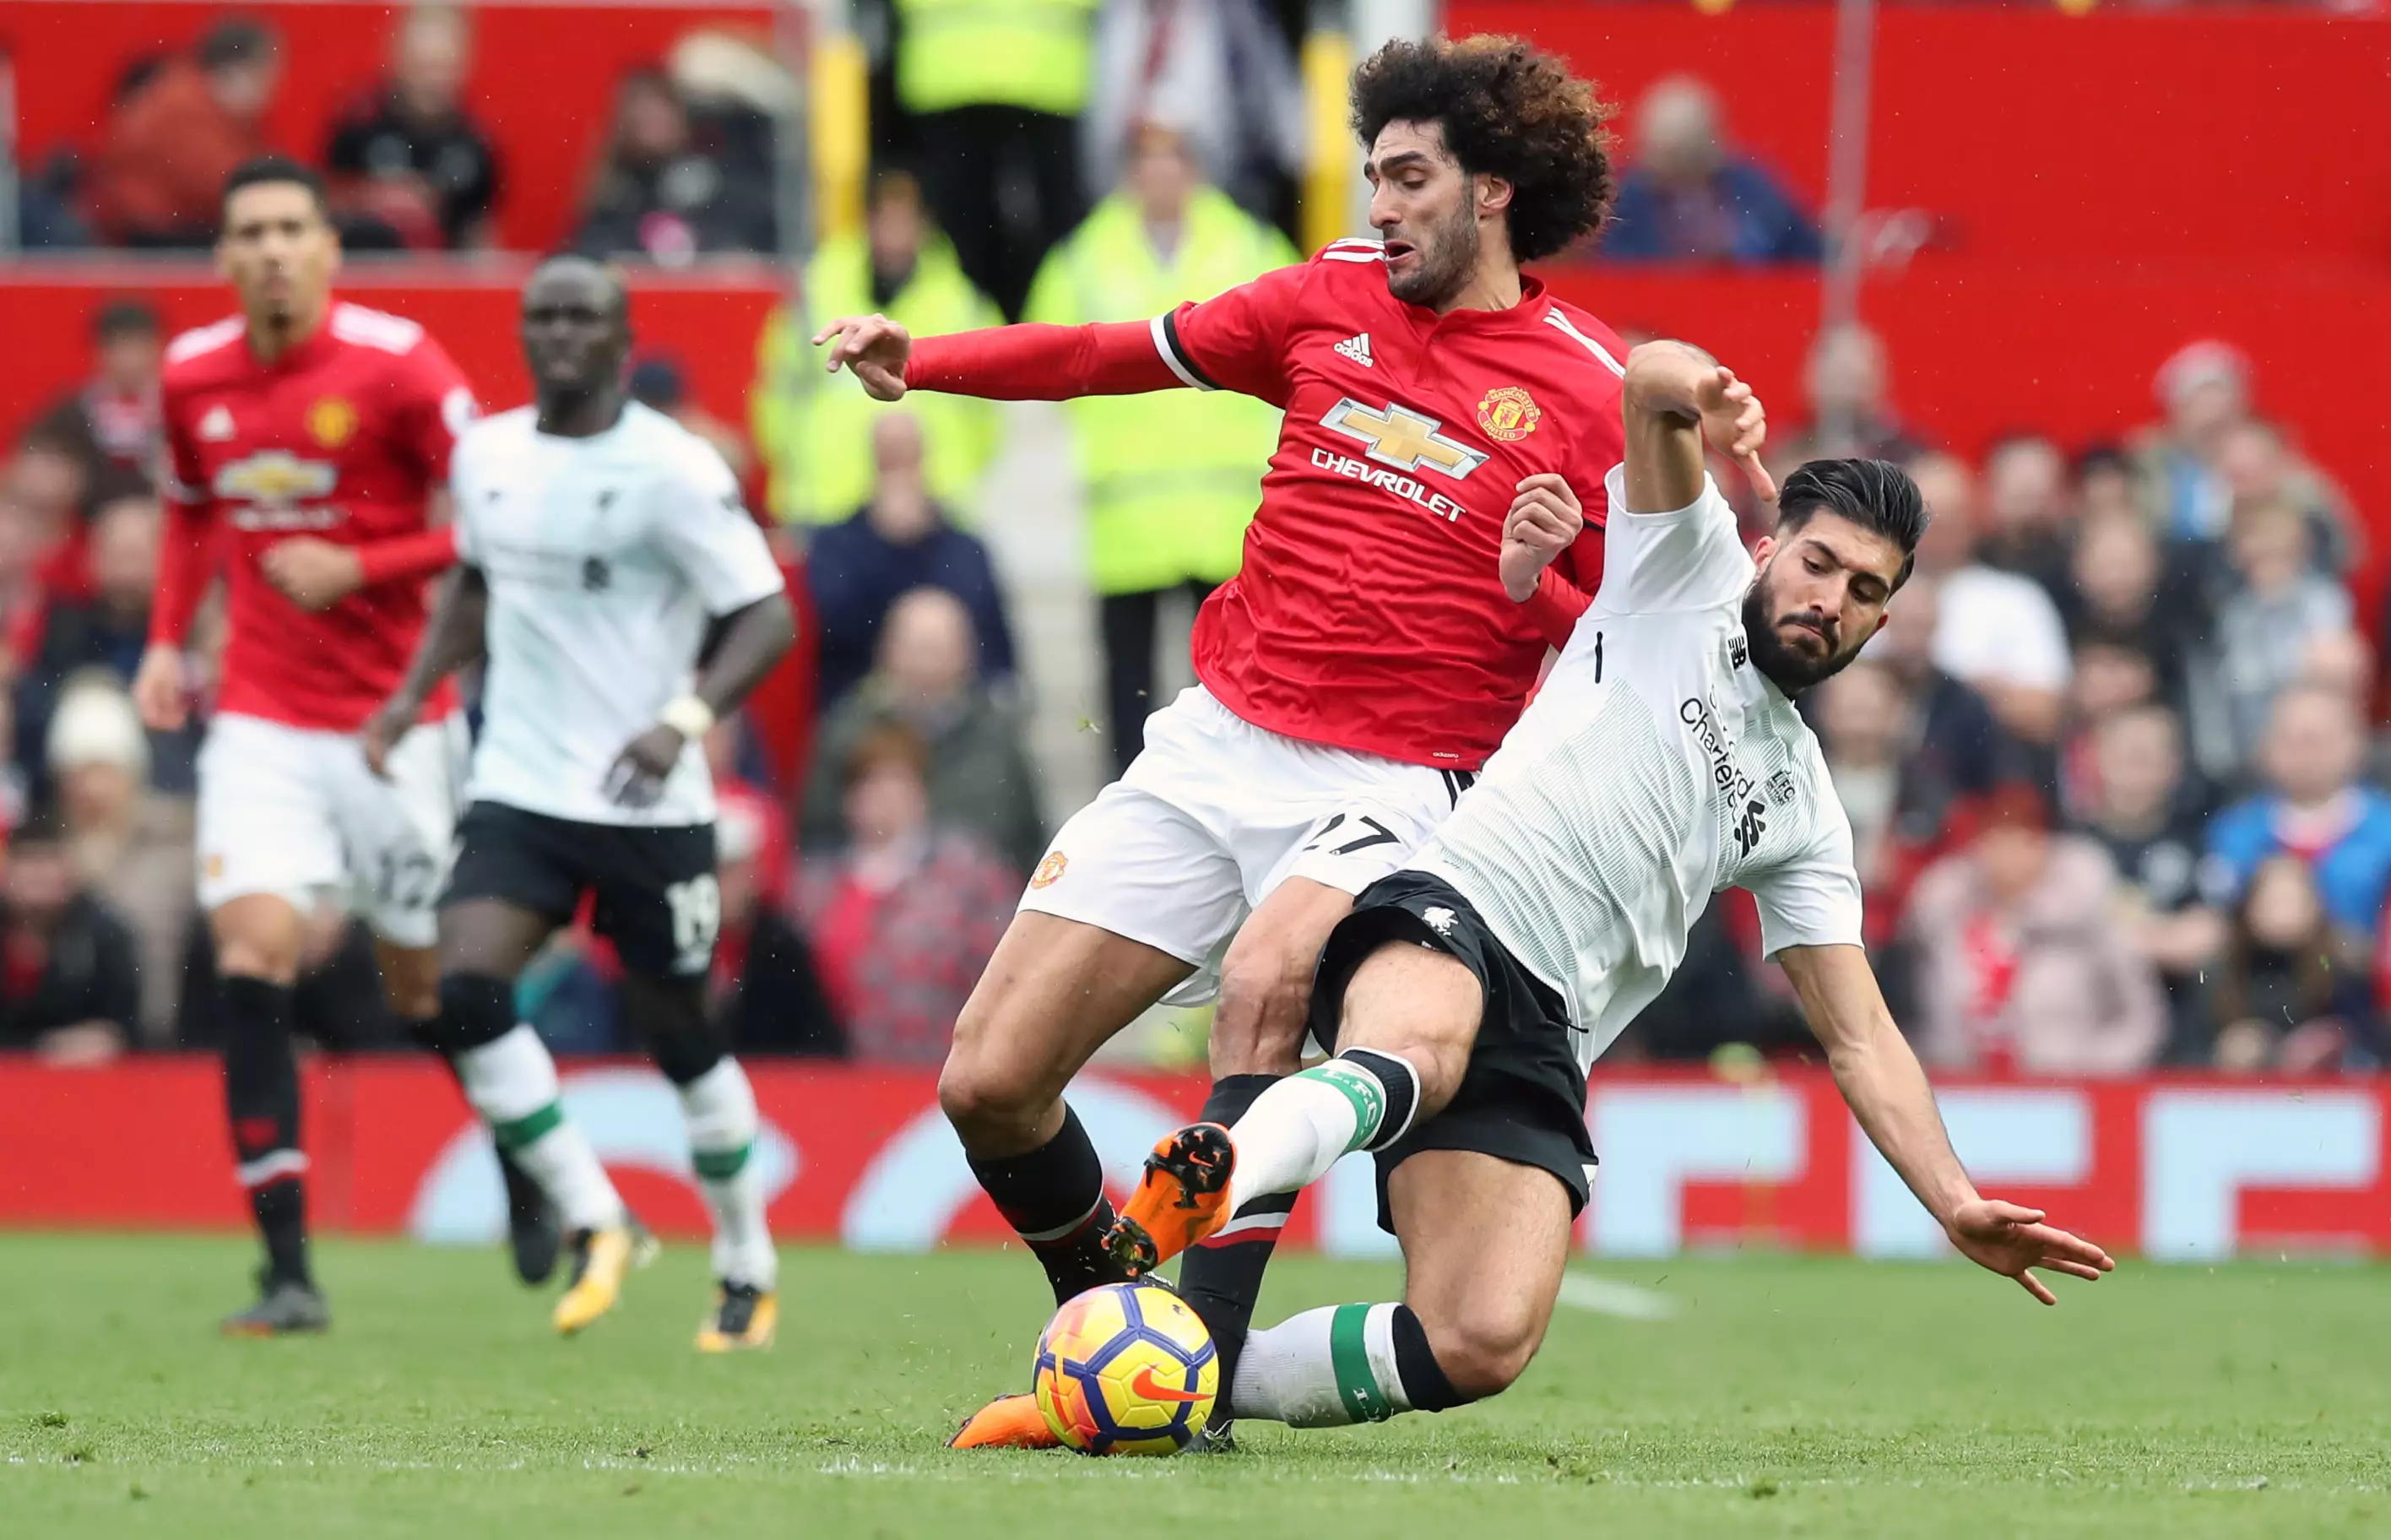 Fellaini in action for United. Image: PA